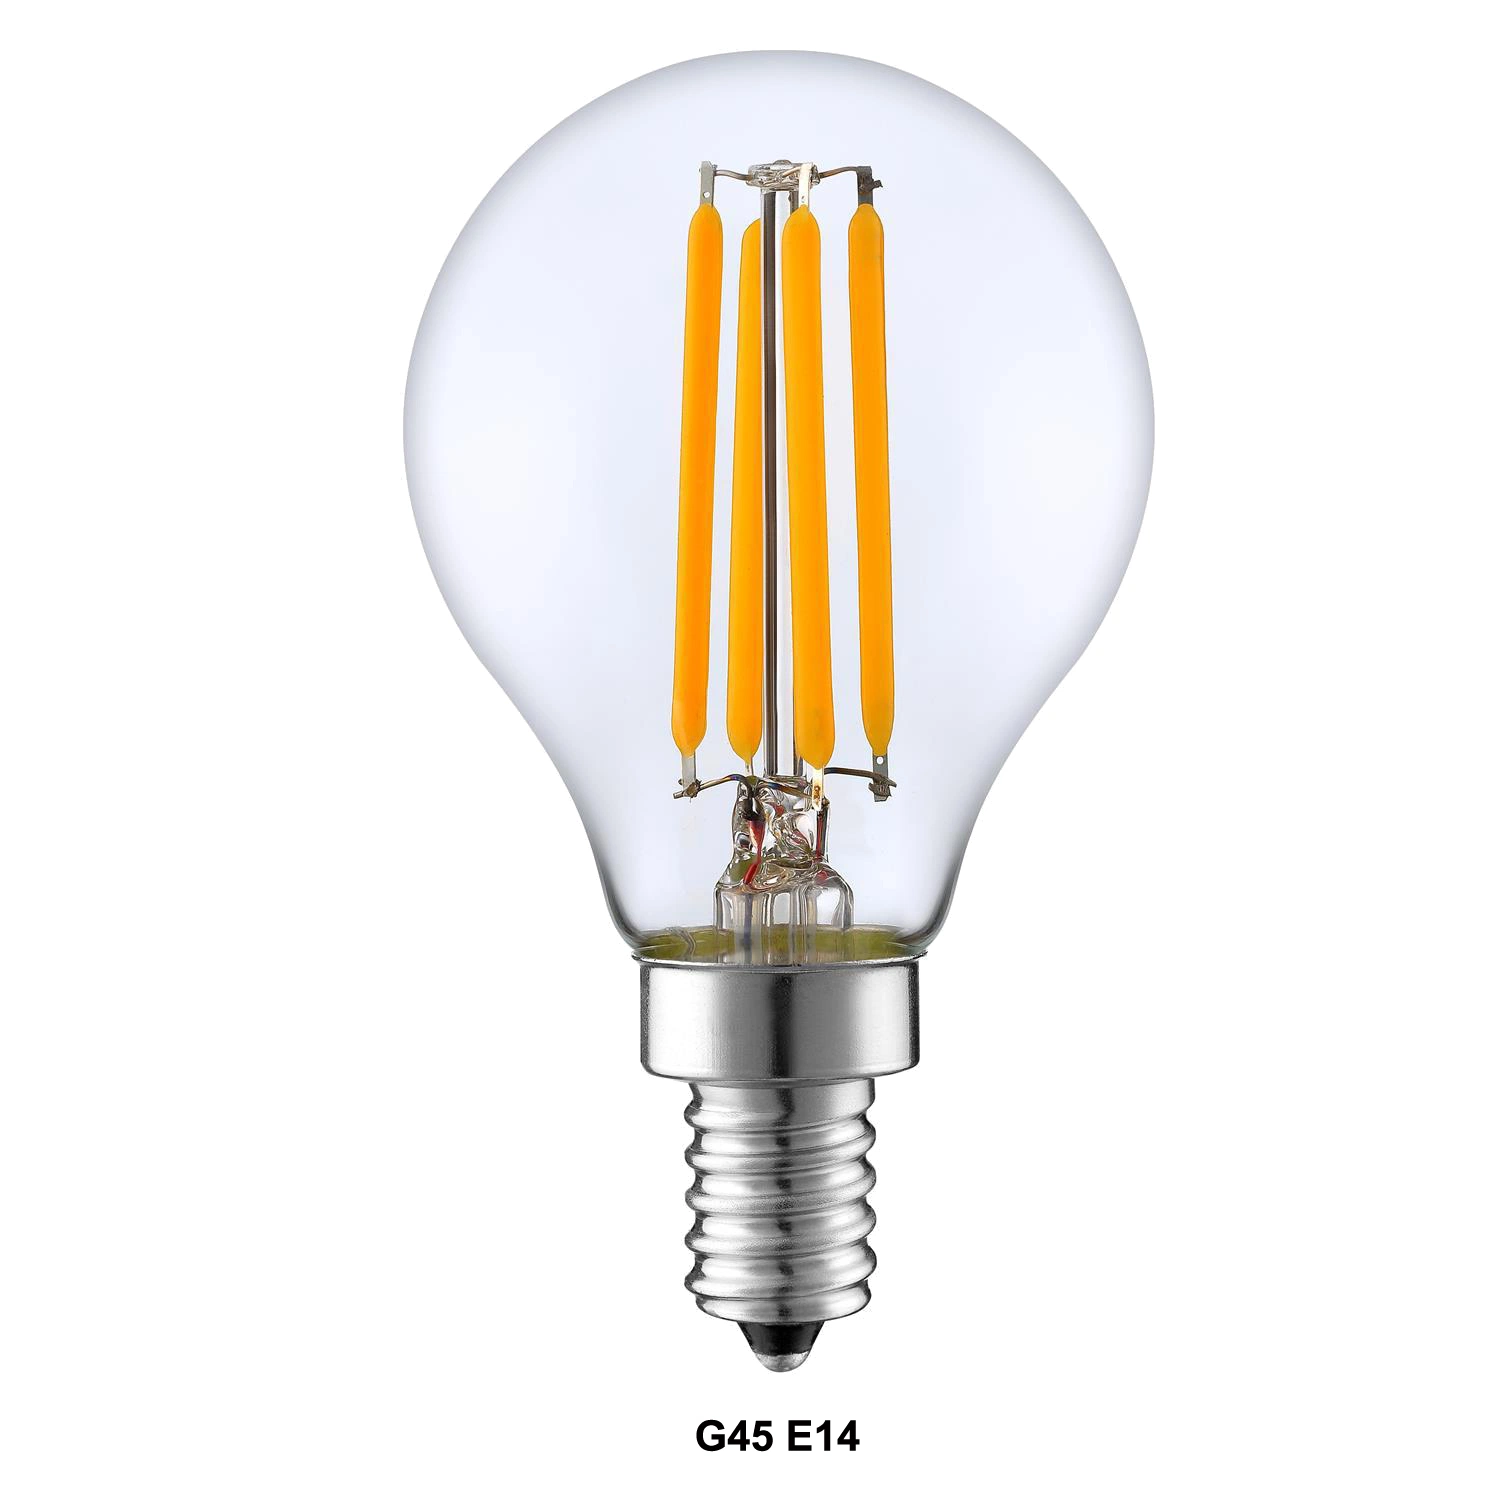 Crystal Chandelier Bulb COB Light G45 2W 4W 6W E14 Clear Ampoule Glass Candle Home Lighting Energy Saving Lamp LED Filament Bulb